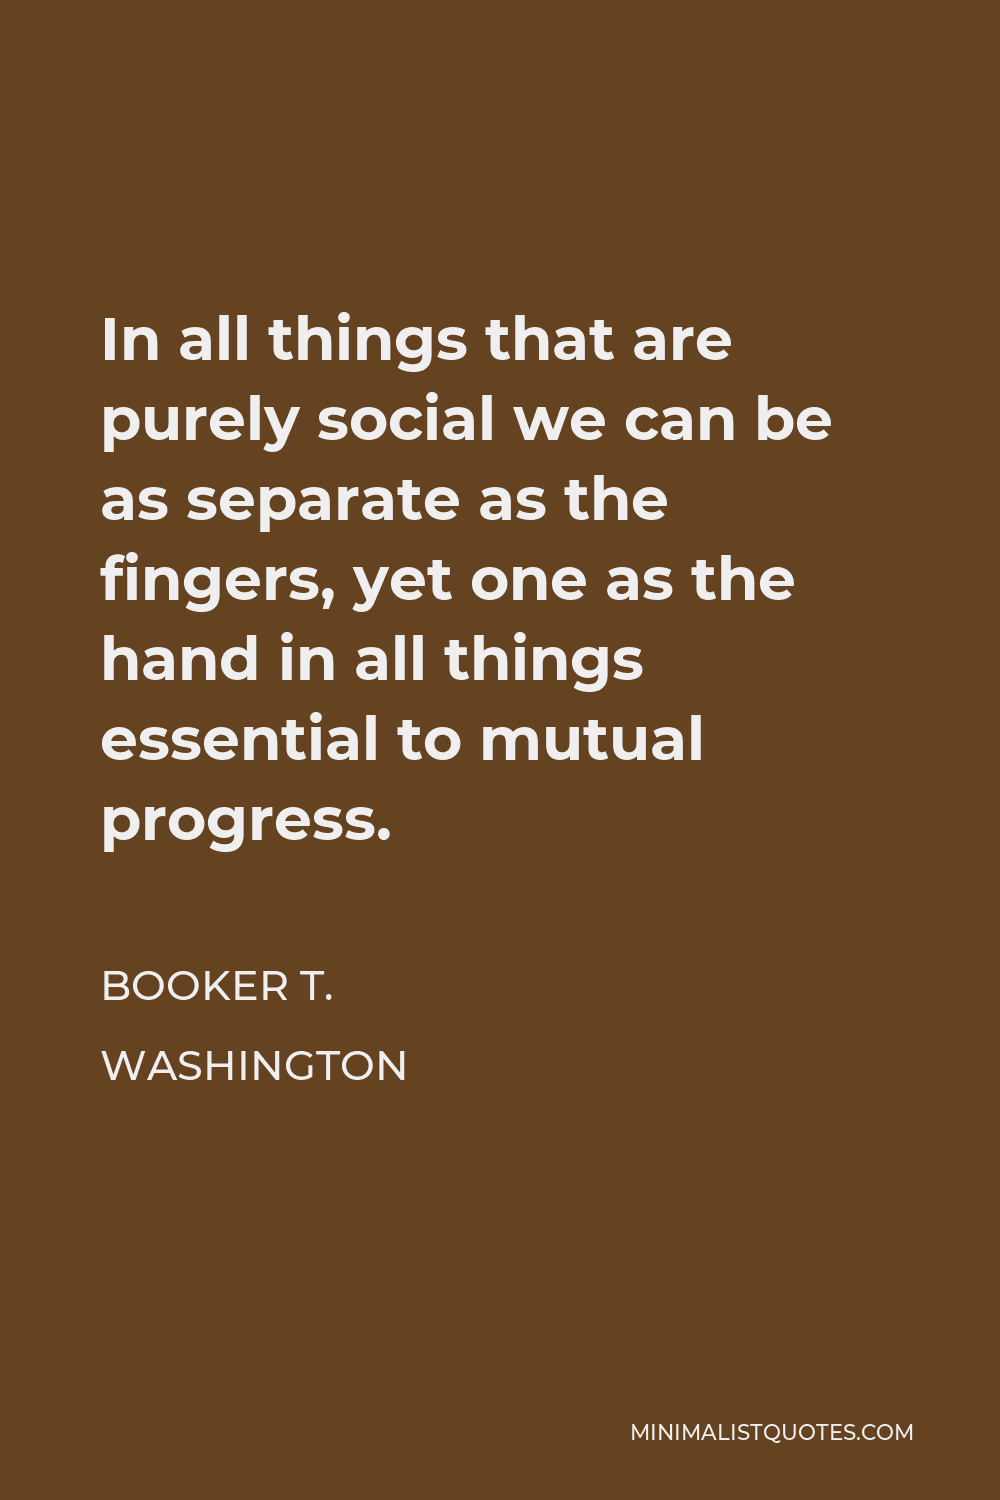 Booker T. Washington Quote - In all things that are purely social we can be as separate as the fingers, yet one as the hand in all things essential to mutual progress.